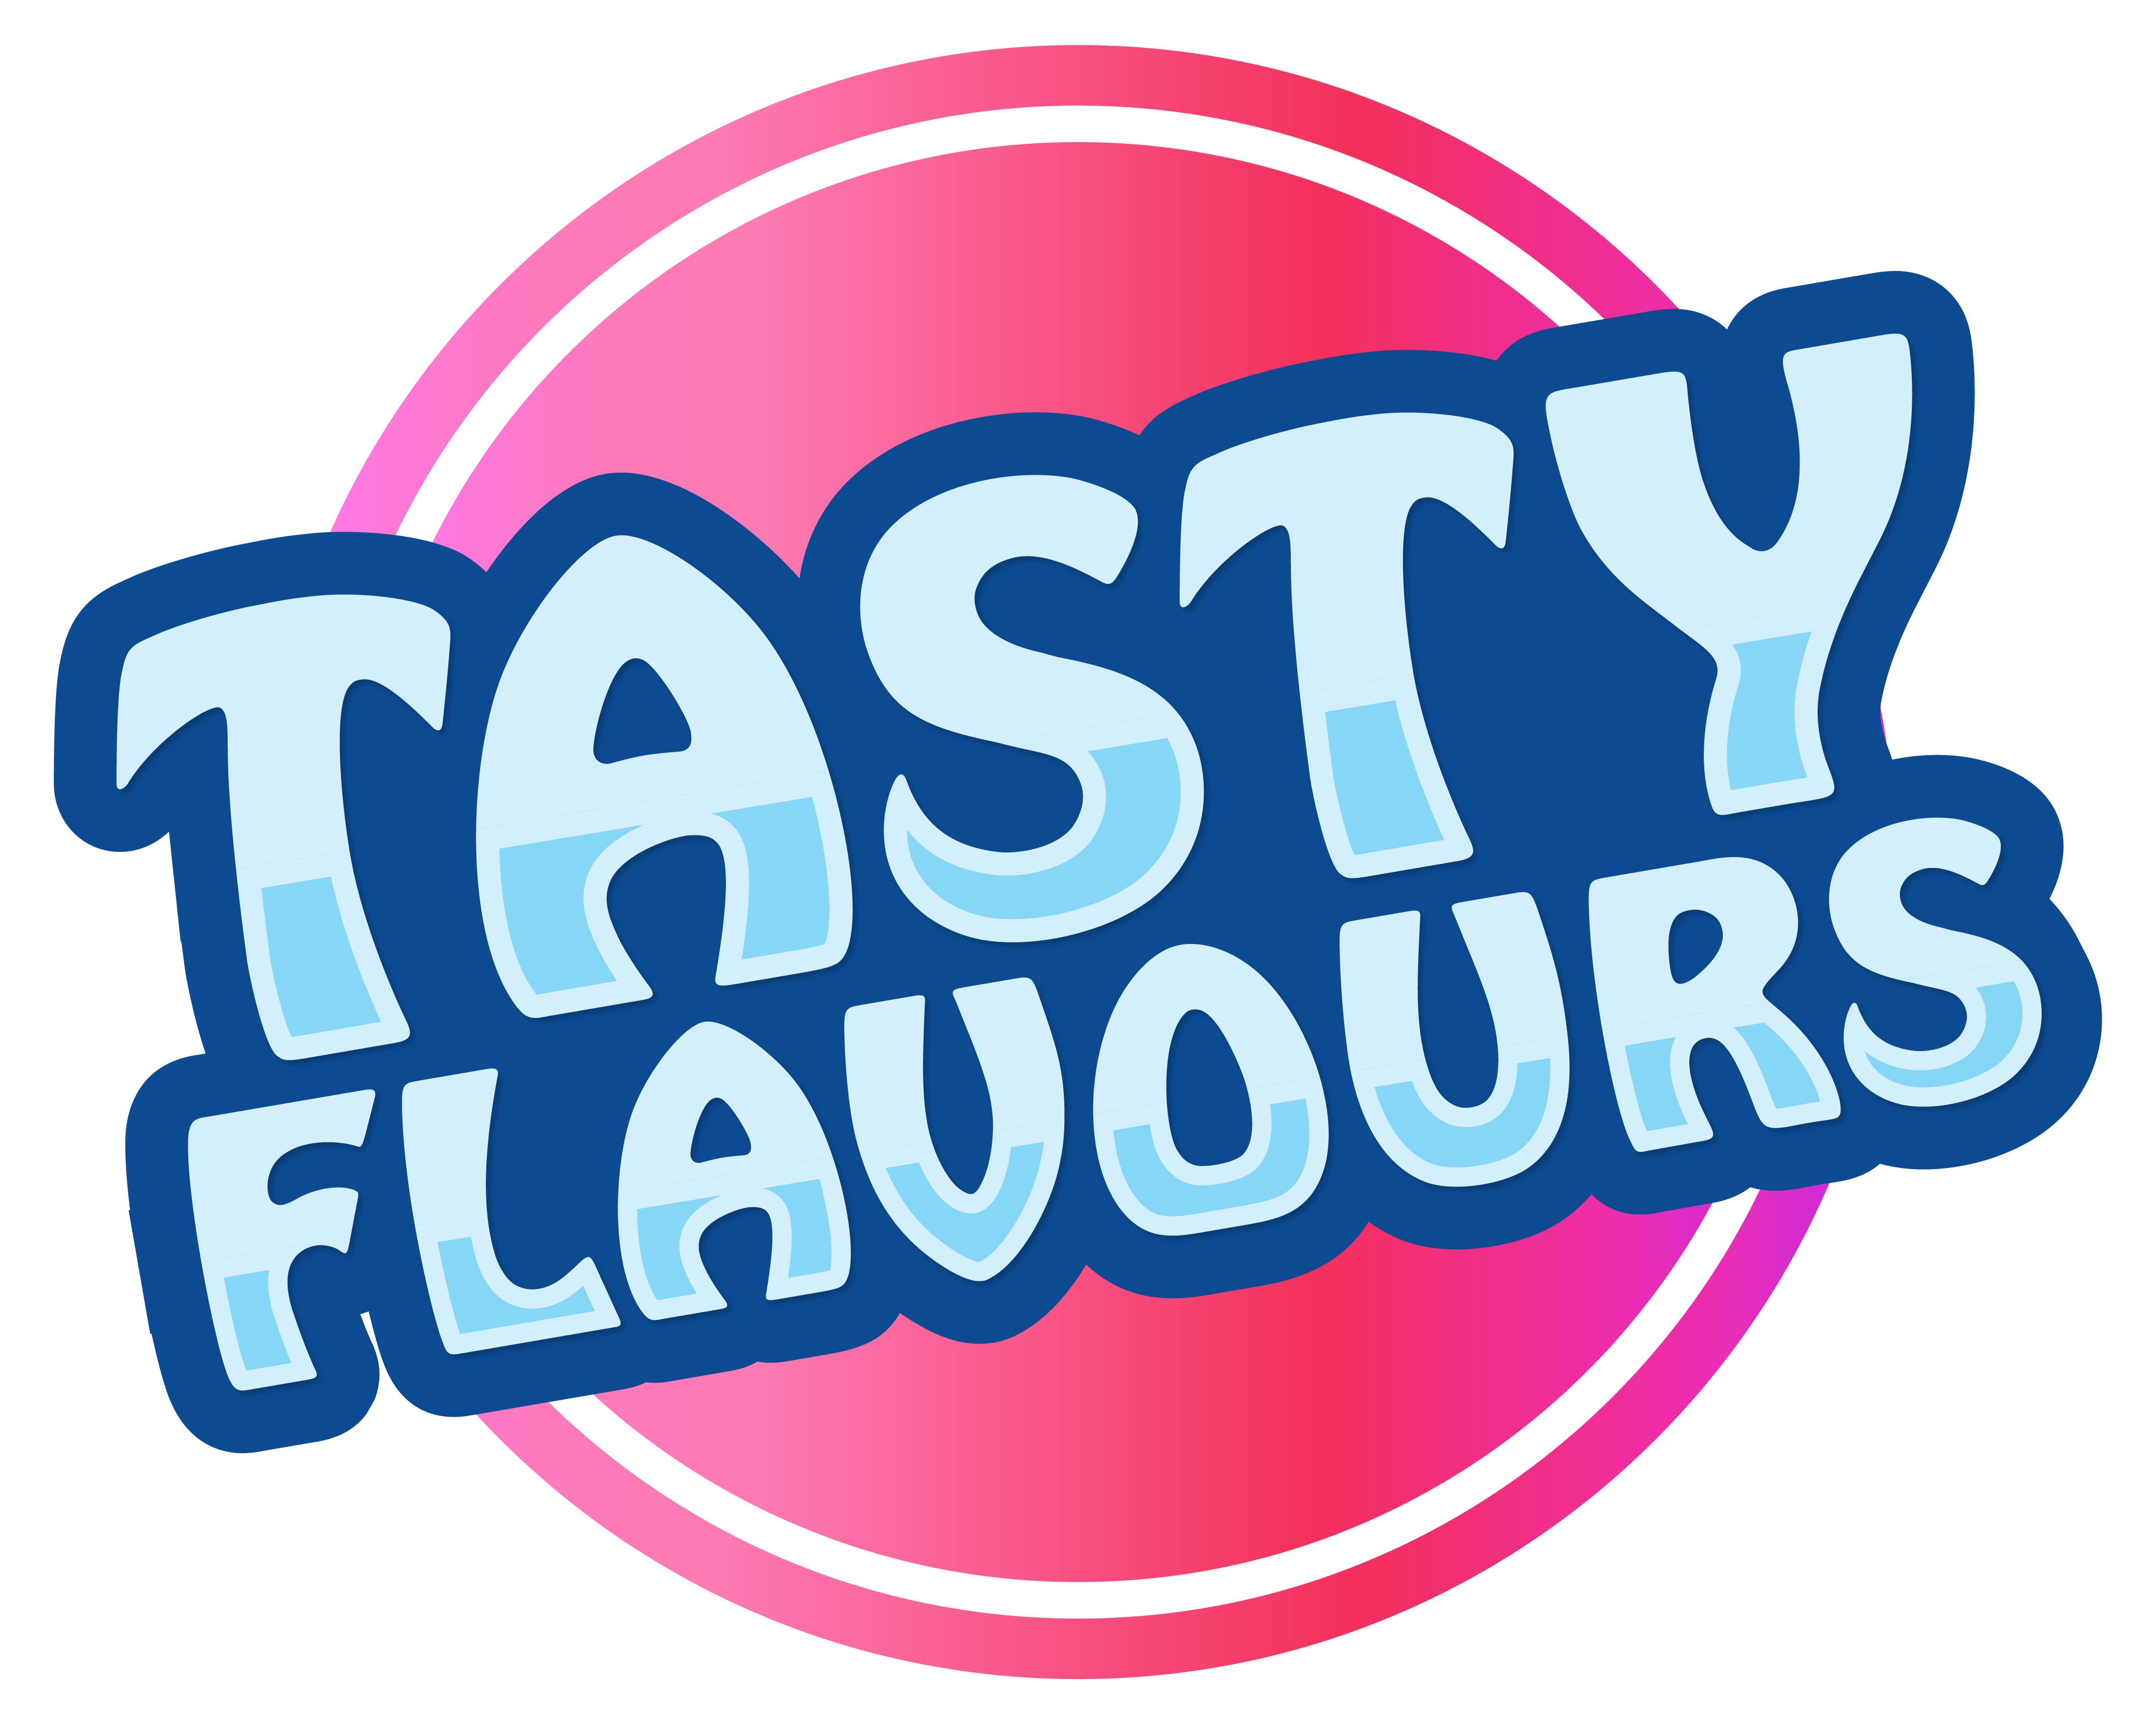 Tasty Flavours